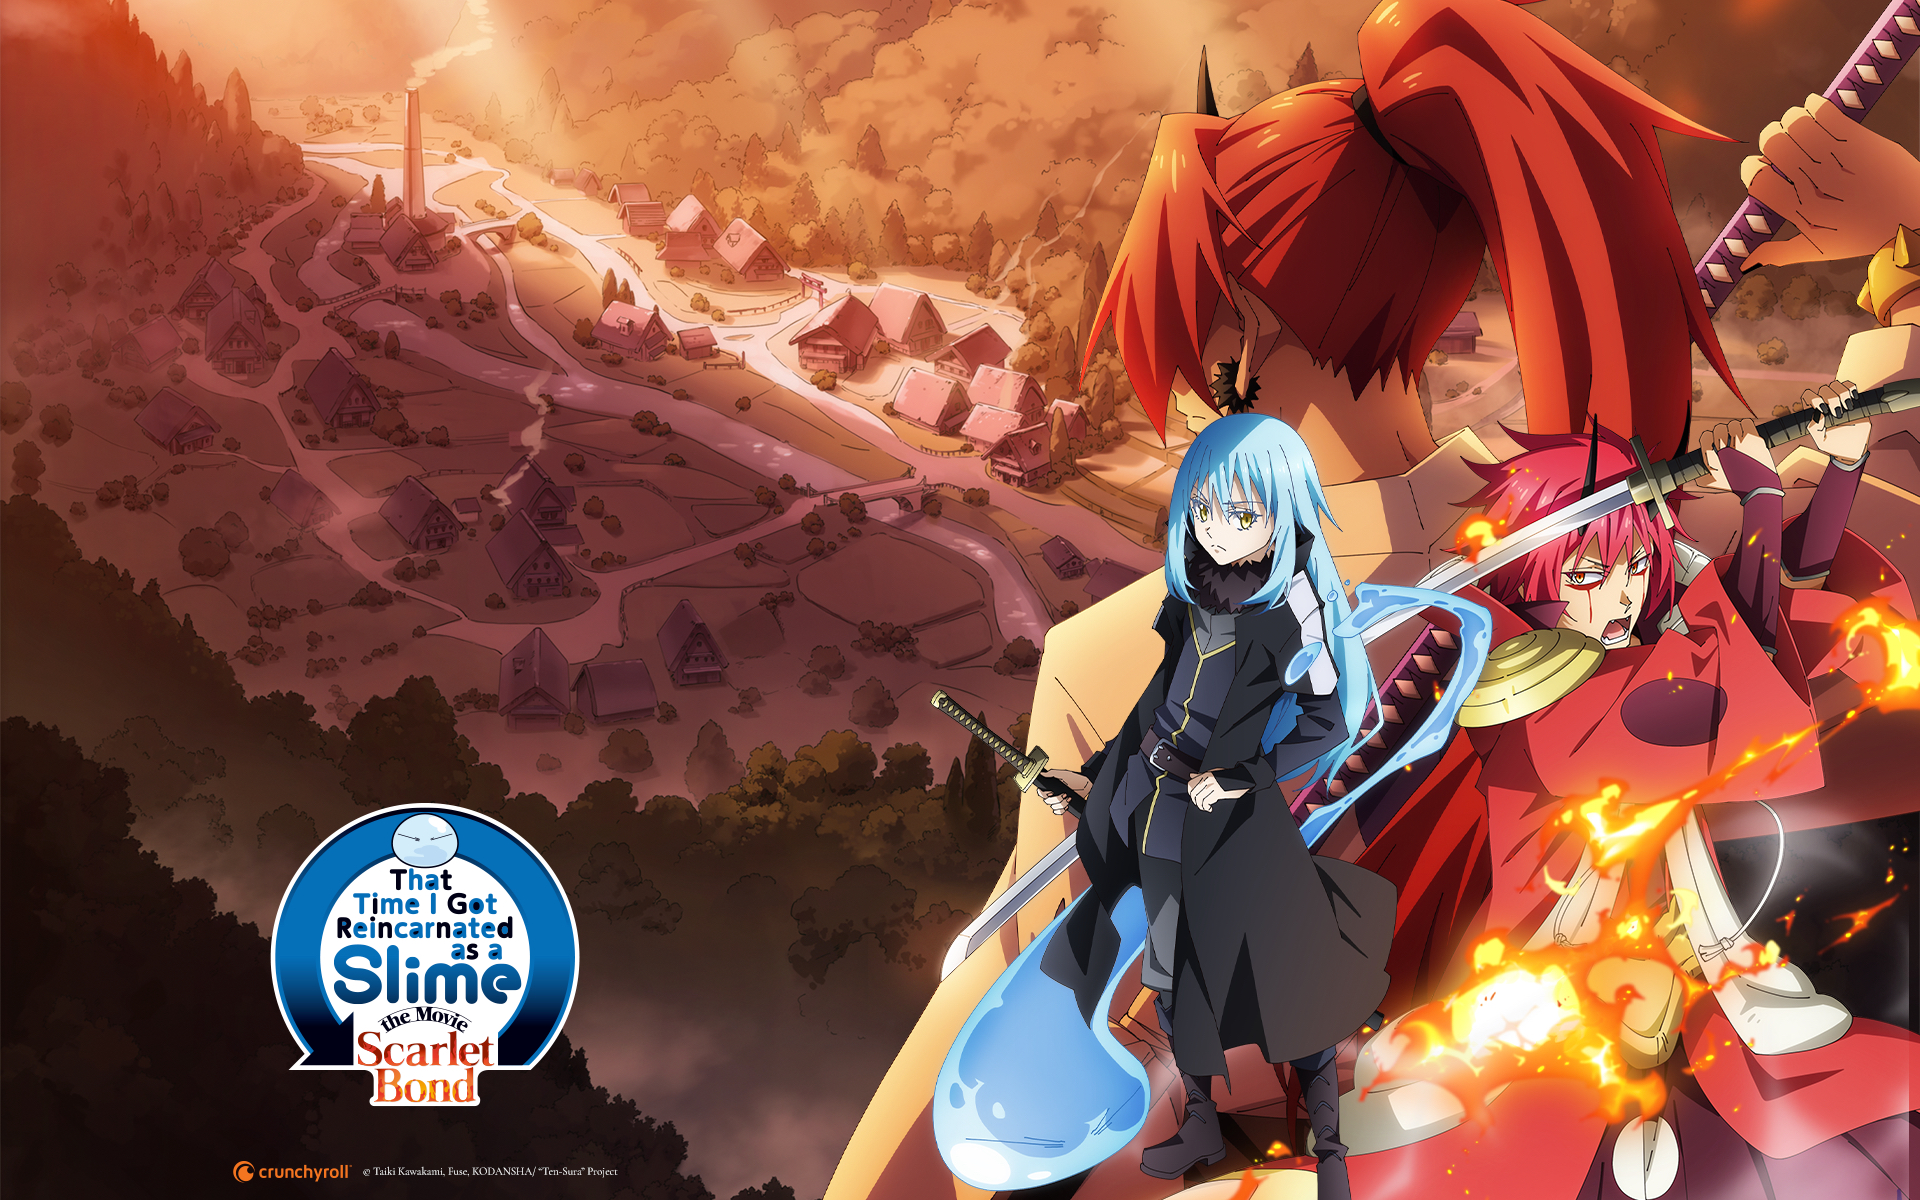 That Time I Got Reincarnated as a Slime Movie 2023 - Official Trailer 